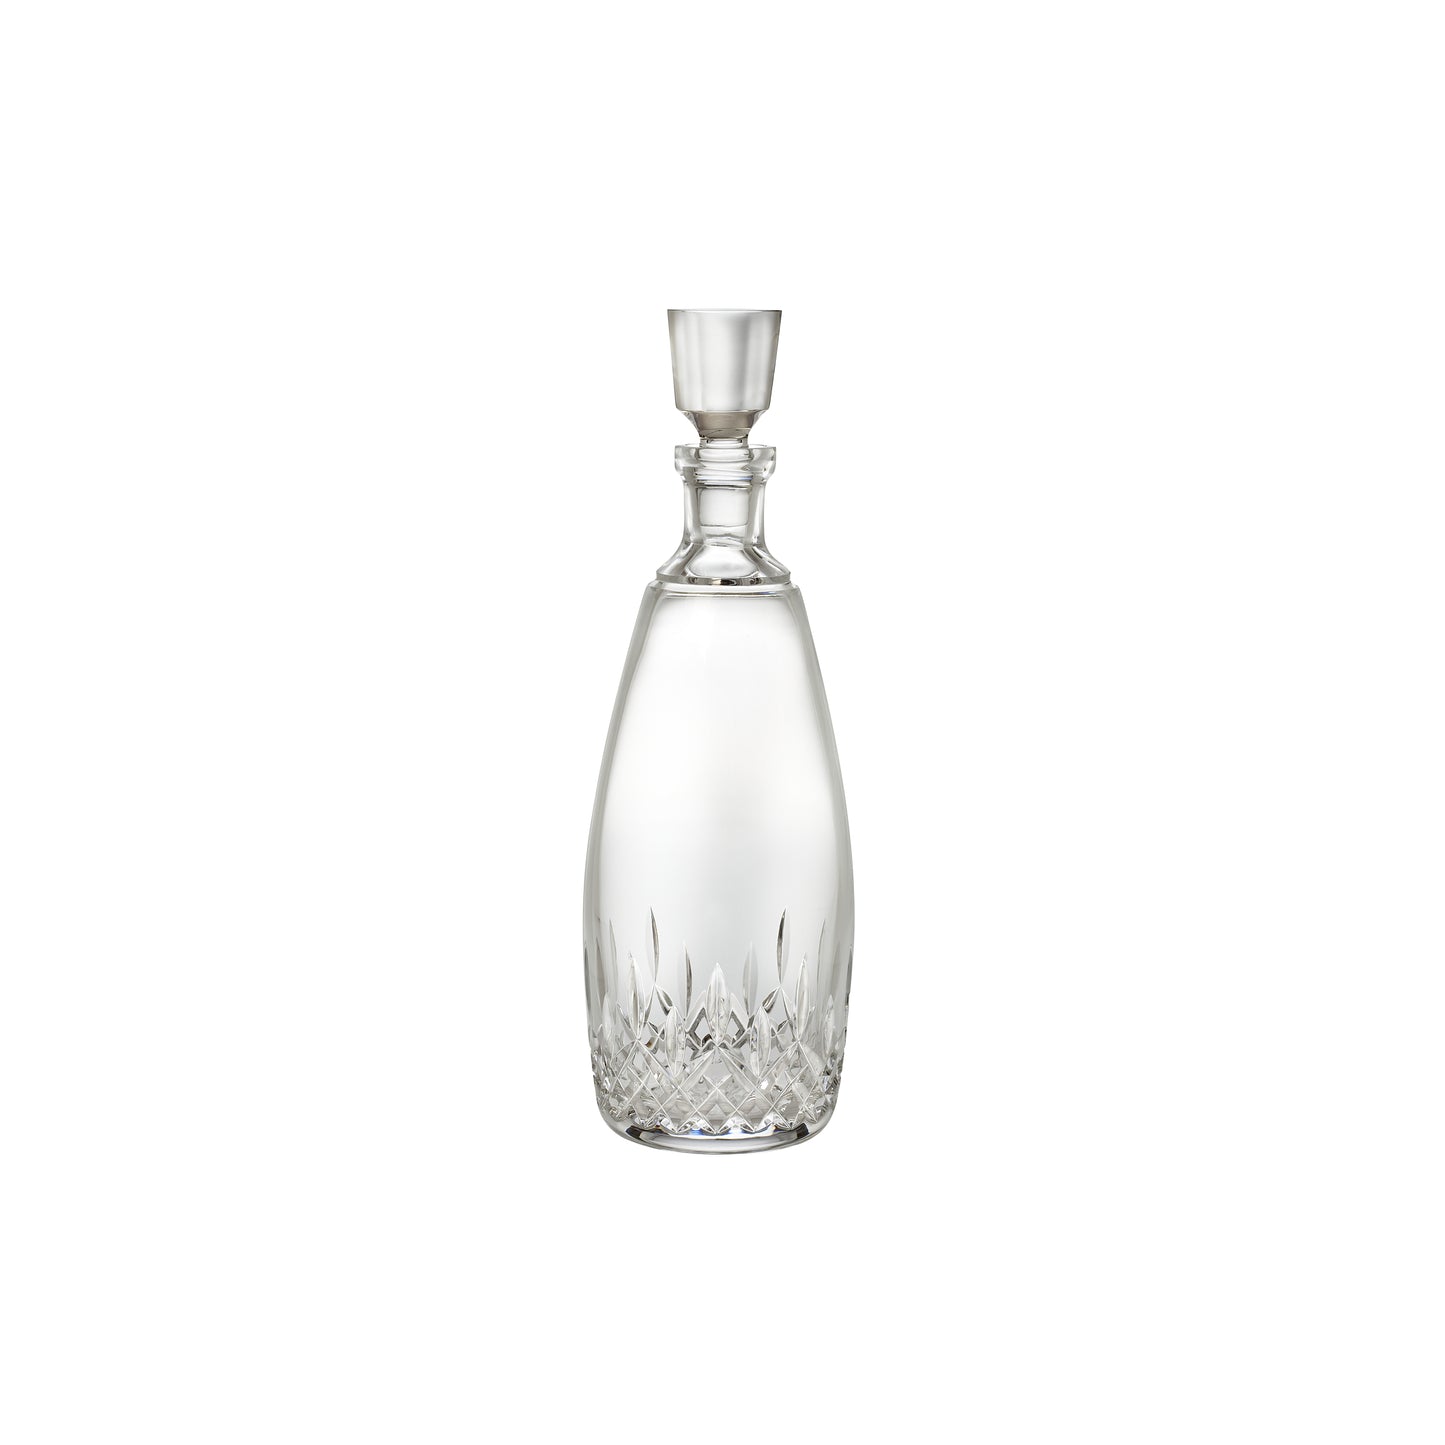 Waterford Lismore Essence Decanter 980ml